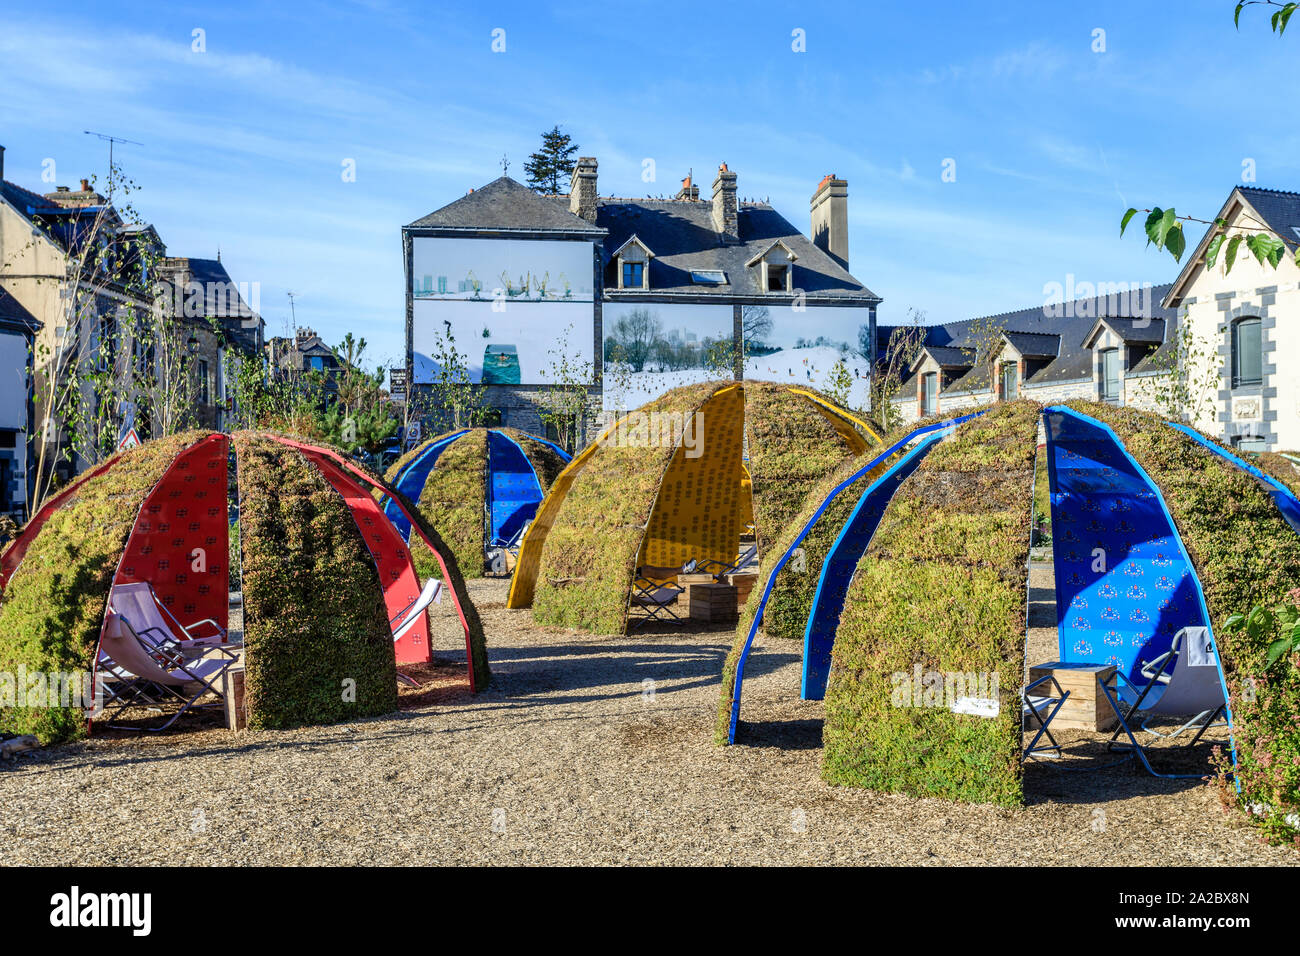 France, Morbihan, La Gacilly, the town during the Festival Photo La Gacilly 2019, outdoor photography exhibitions, relaxation area // France, Morbihan Stock Photo